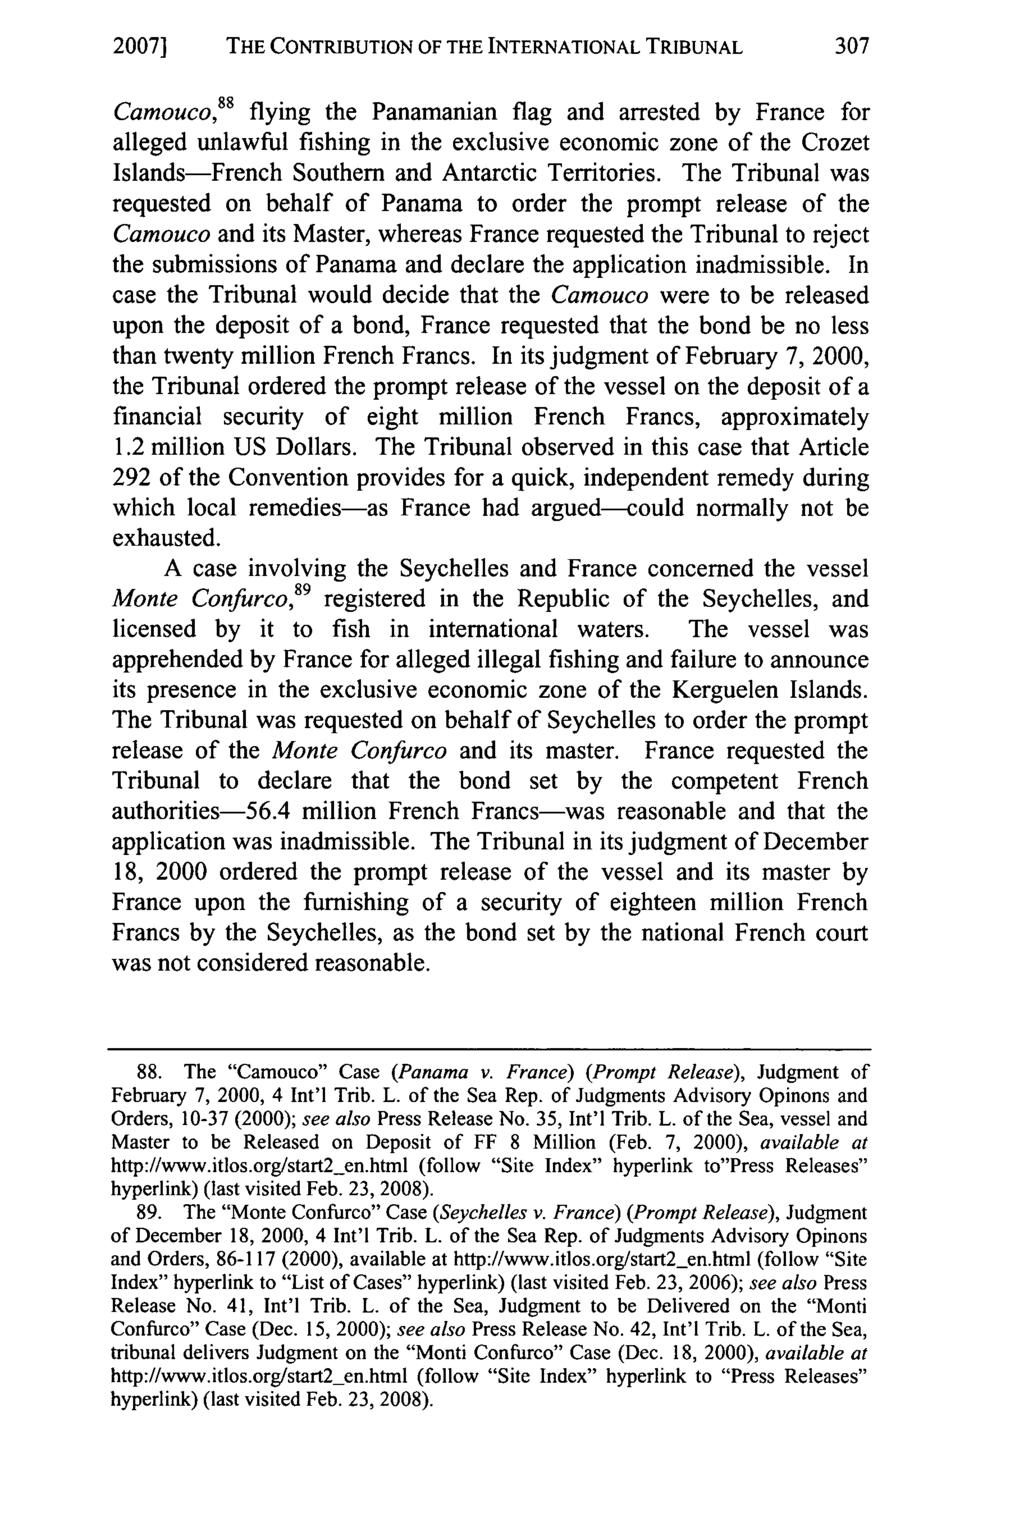 2007] THE CONTRIBUTION OF THE INTERNATIONAL TRIBUNAL 307 Camouco, 88 flying the Panamanian flag and arrested by France for alleged unlawful fishing in the exclusive economic zone of the Crozet